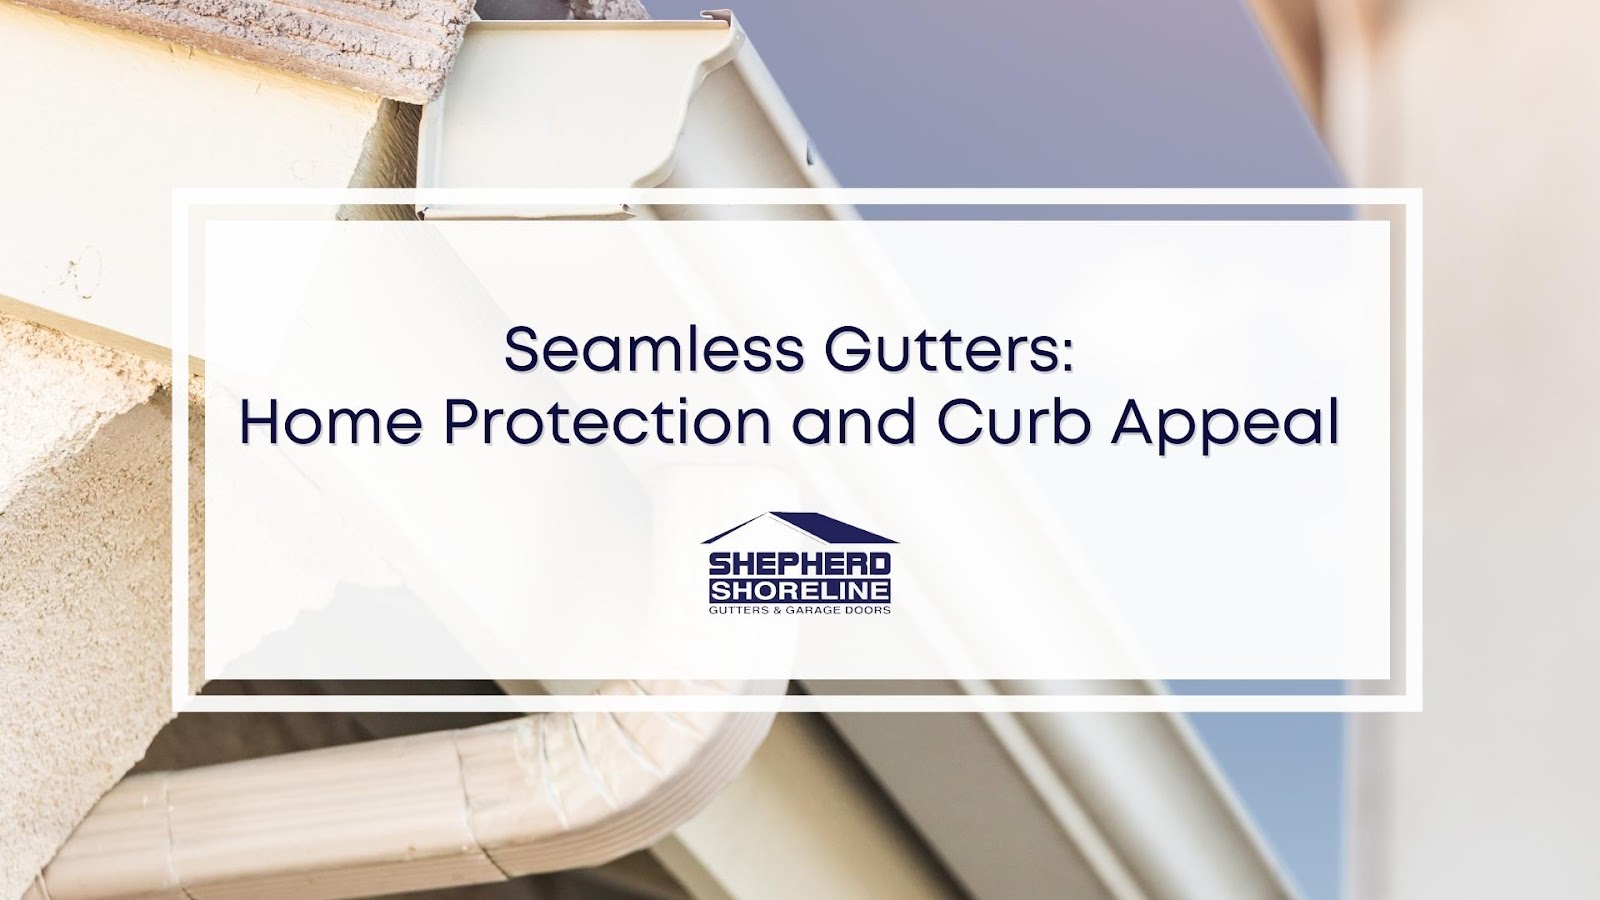 Featured image of seamless gutters home protection and curb appeal improvement